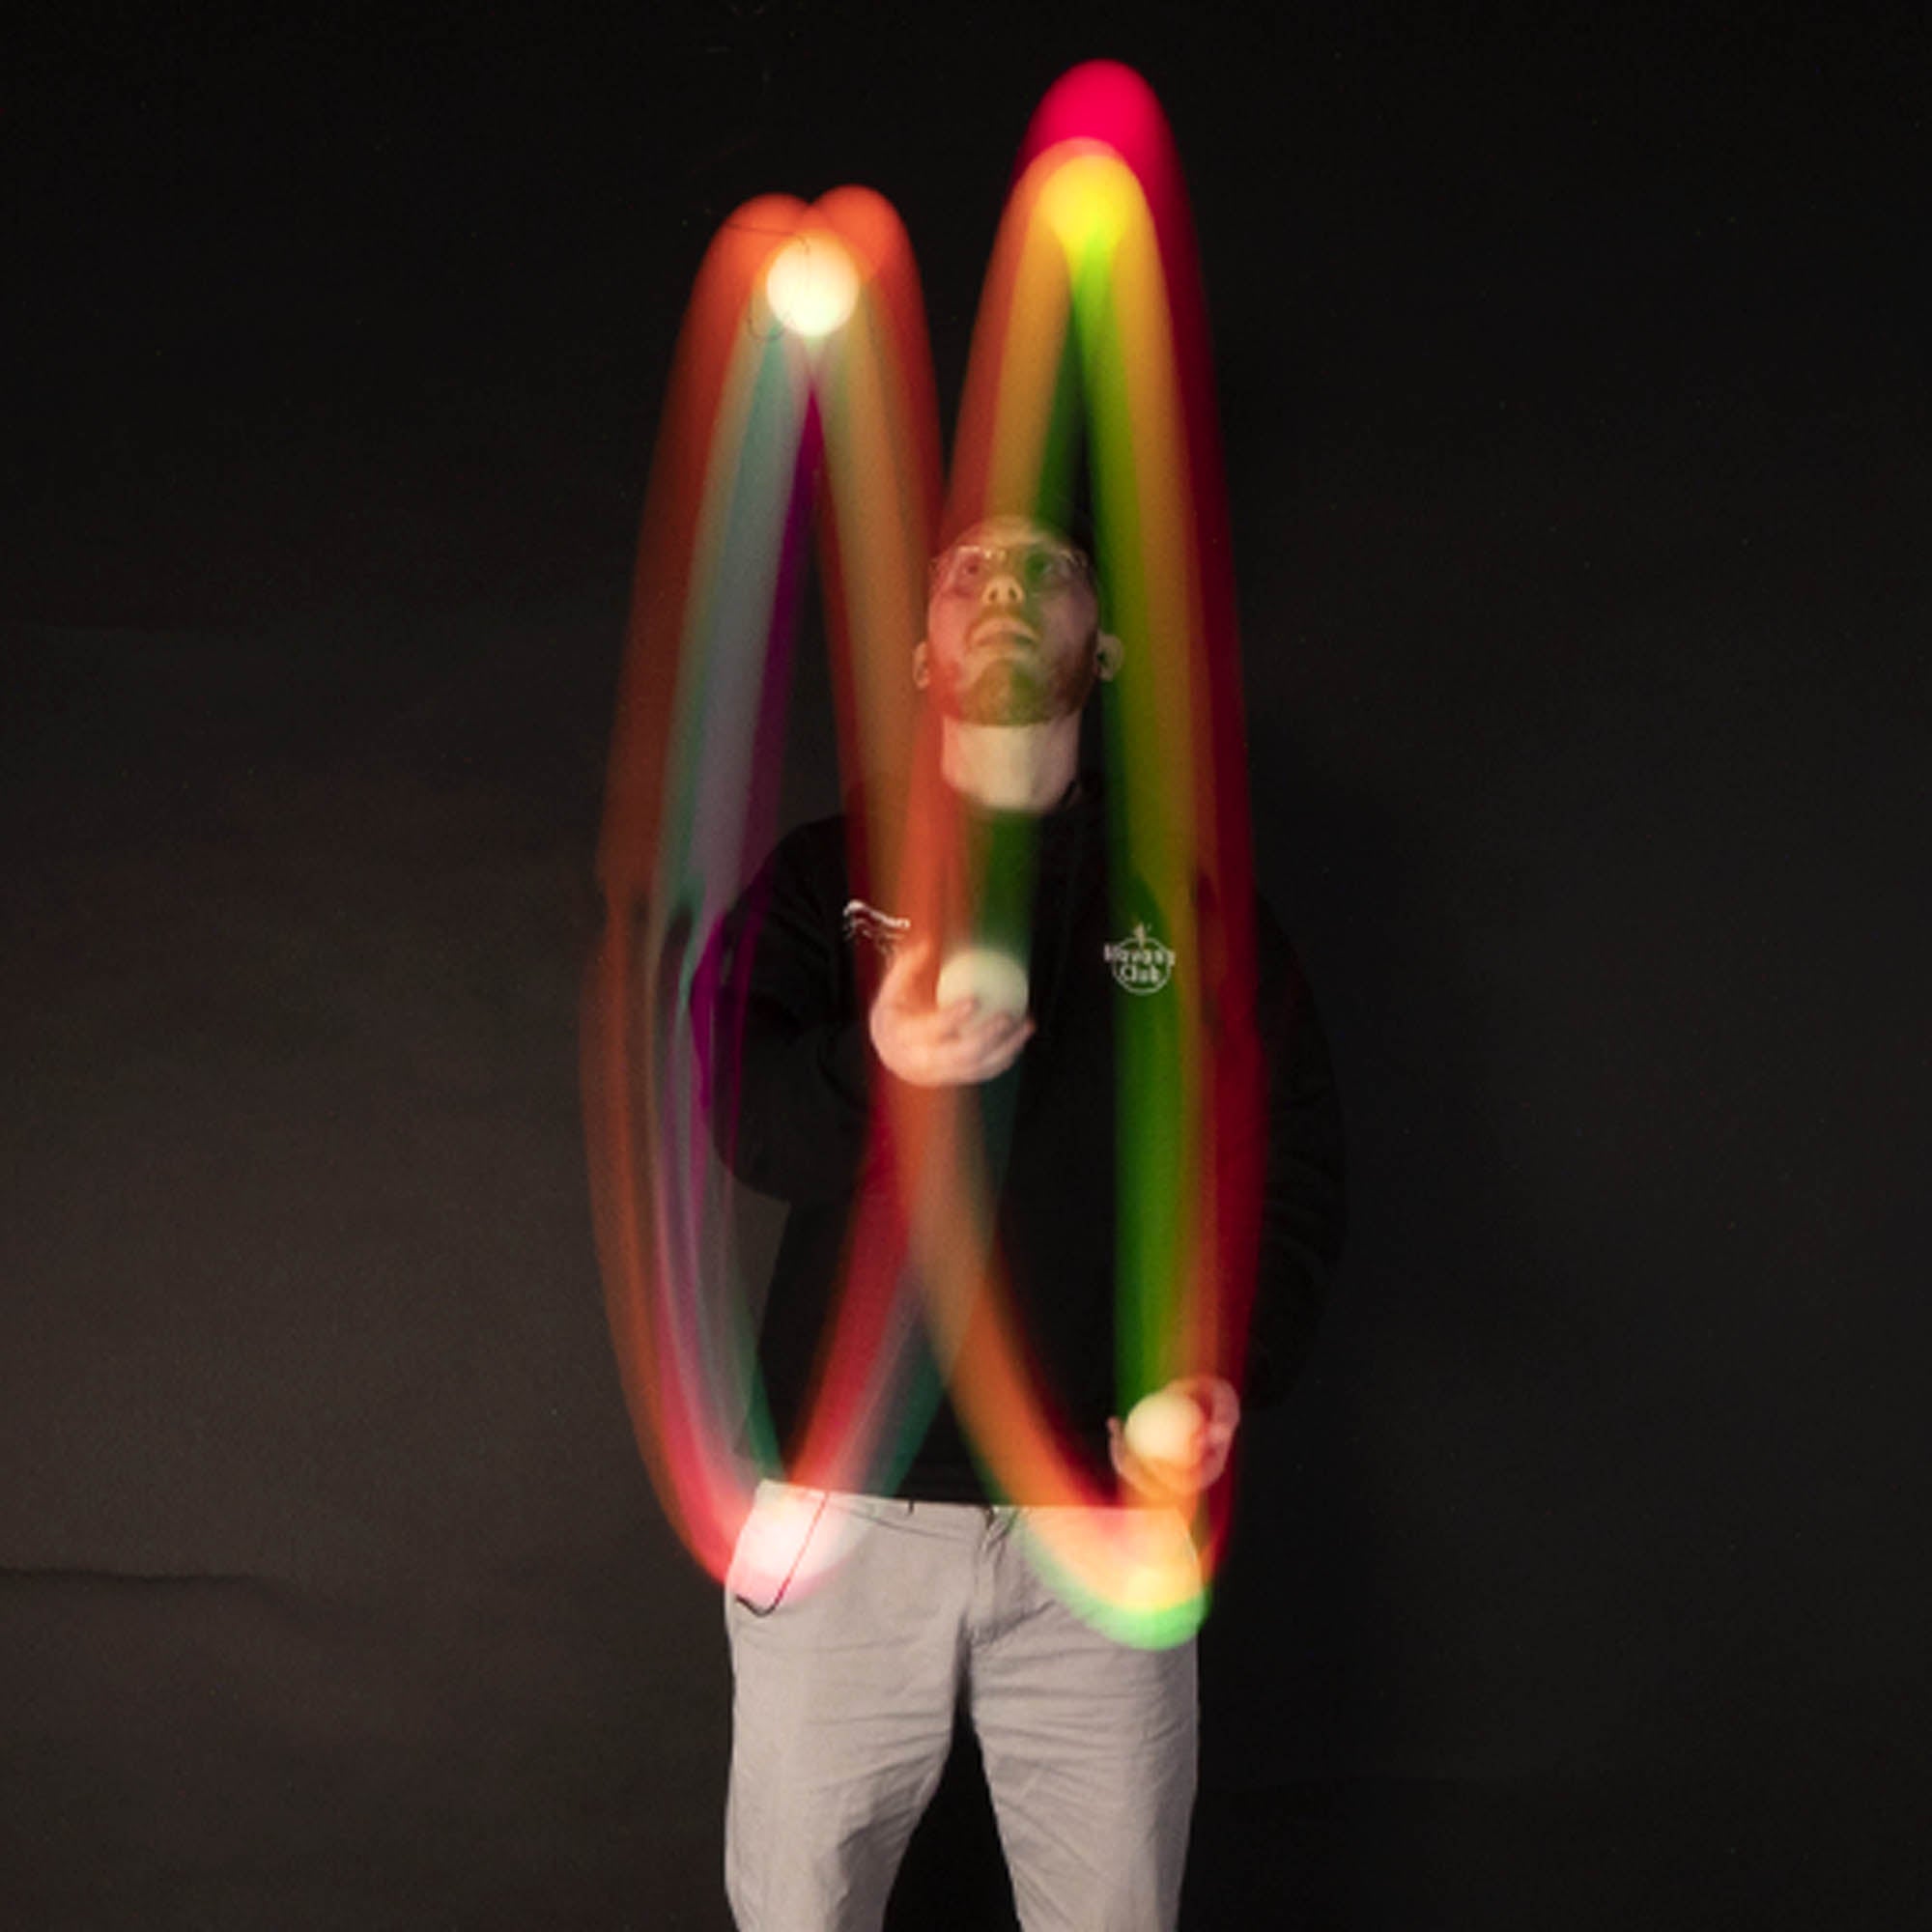 3 balls being juggled with light trails